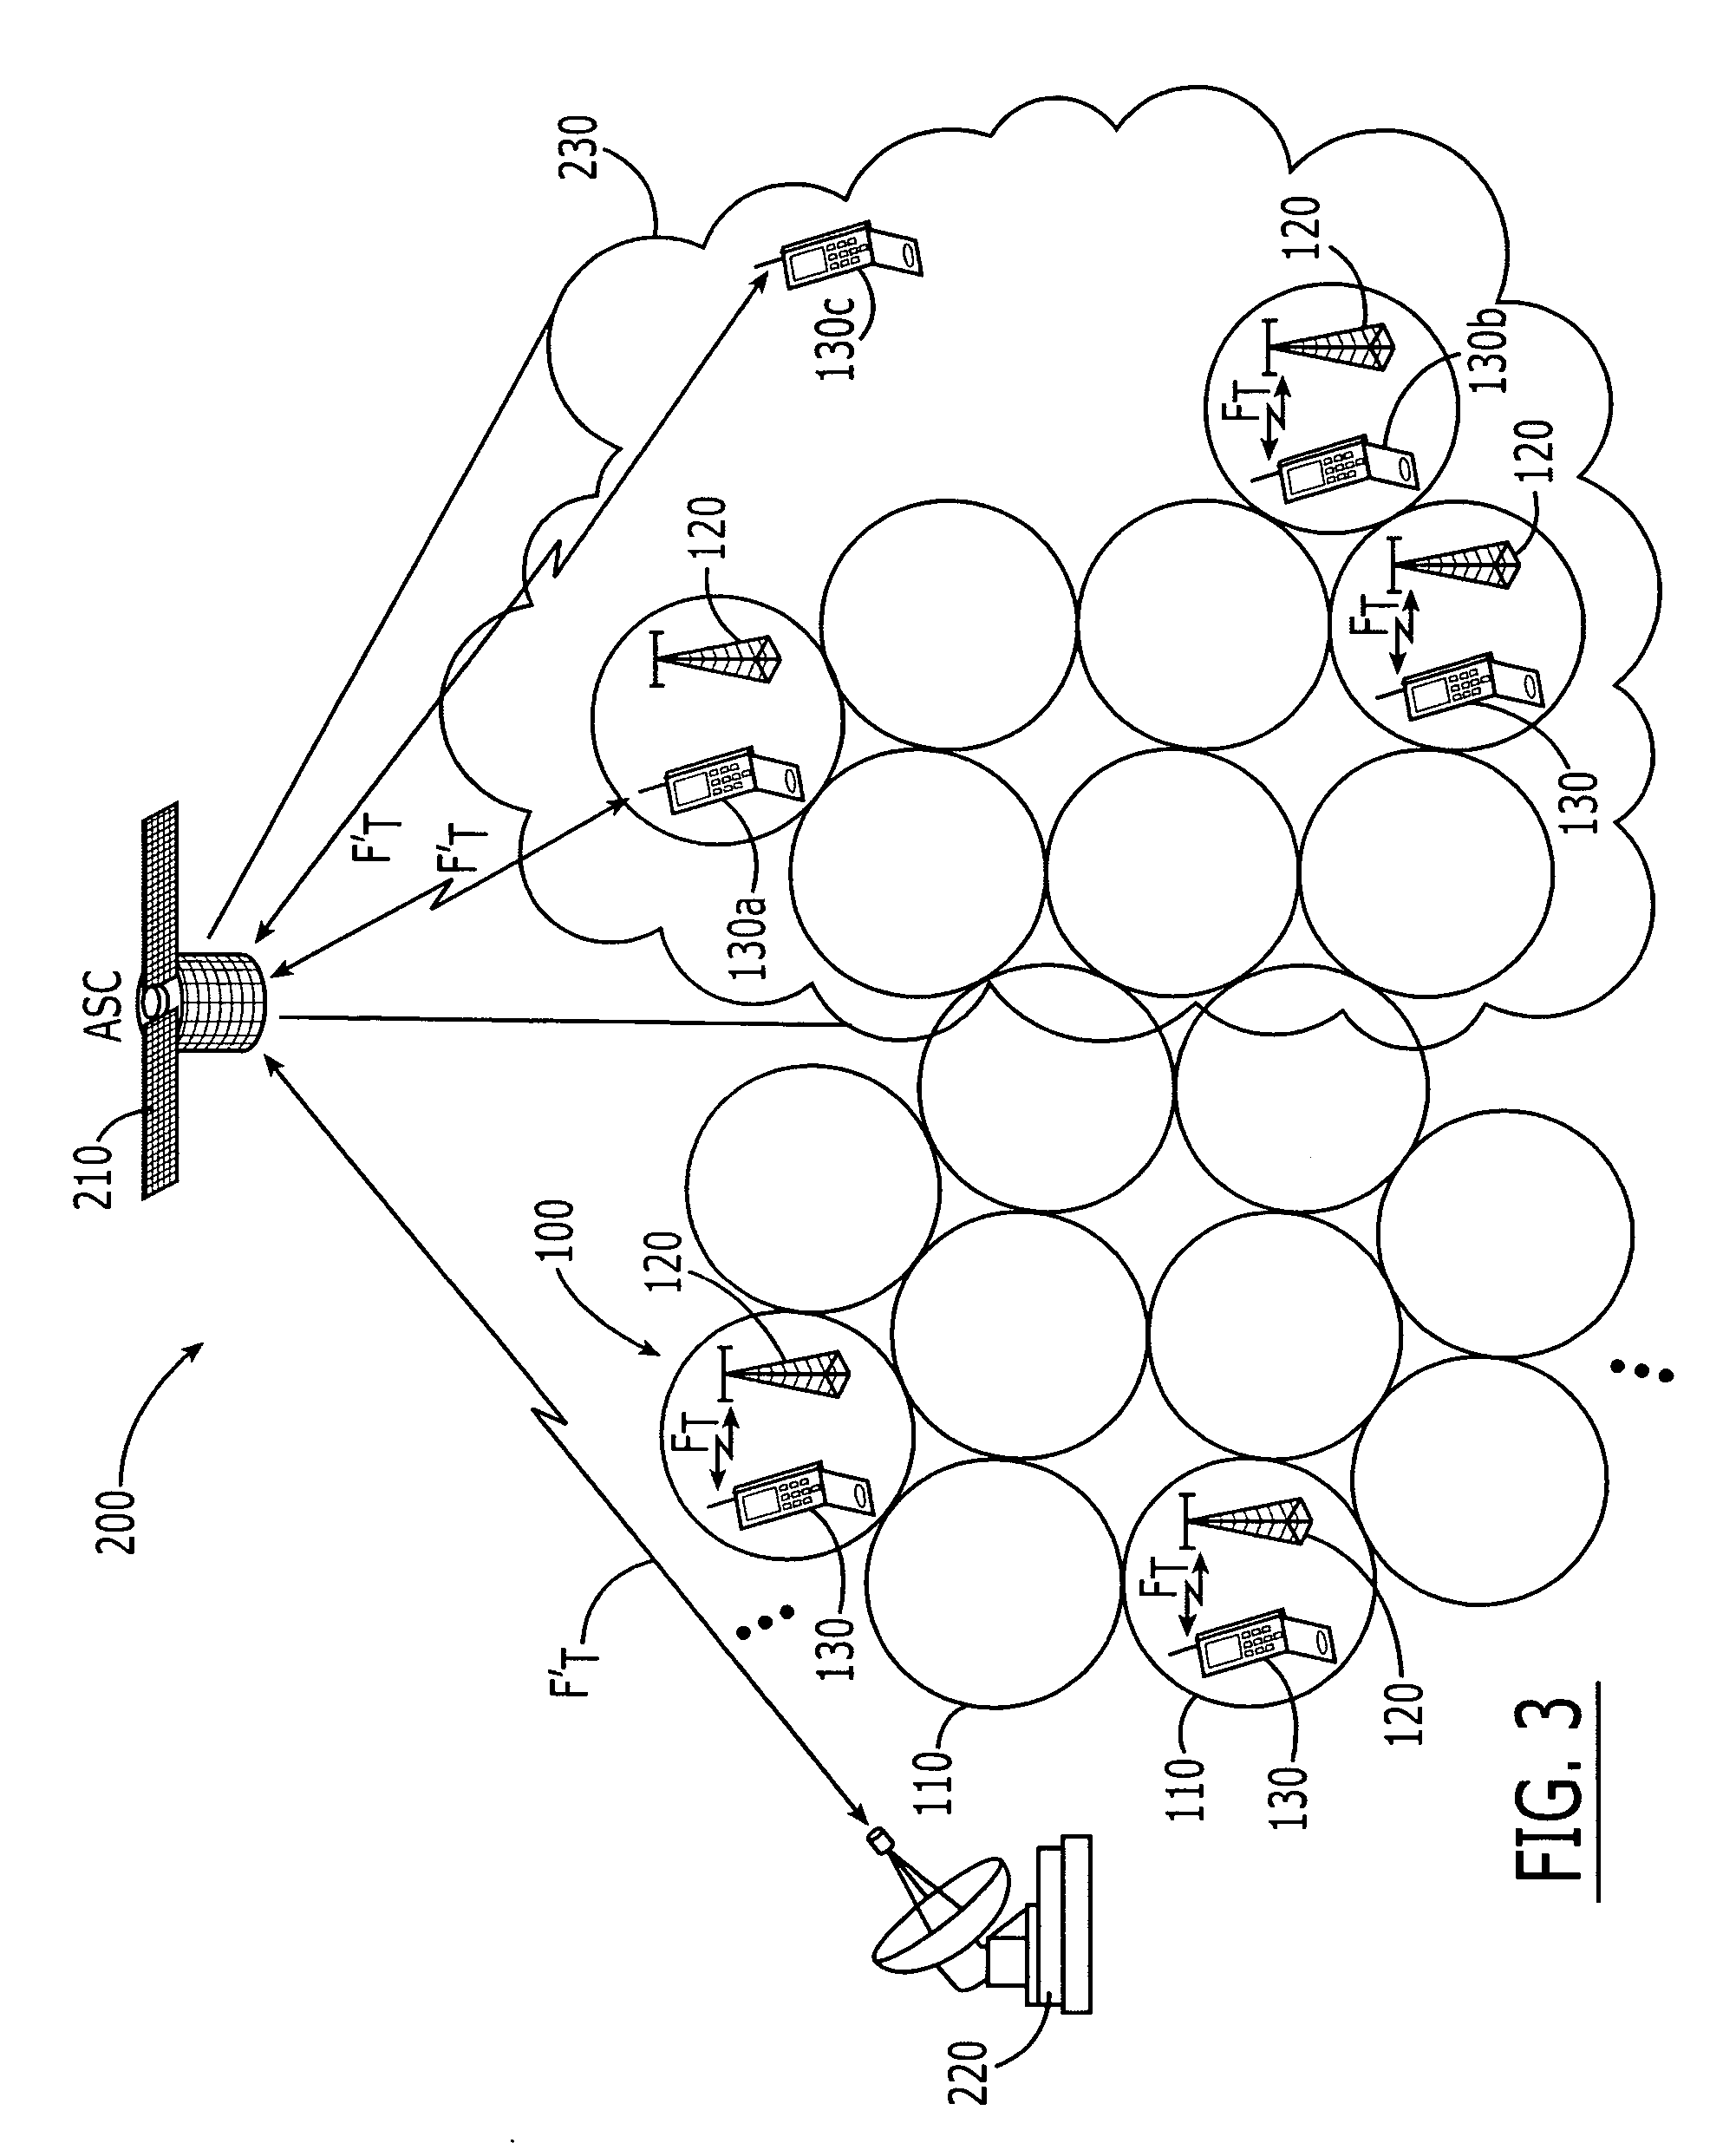 Systems and methods for space-based use of terrestrial cellular frequency spectrum